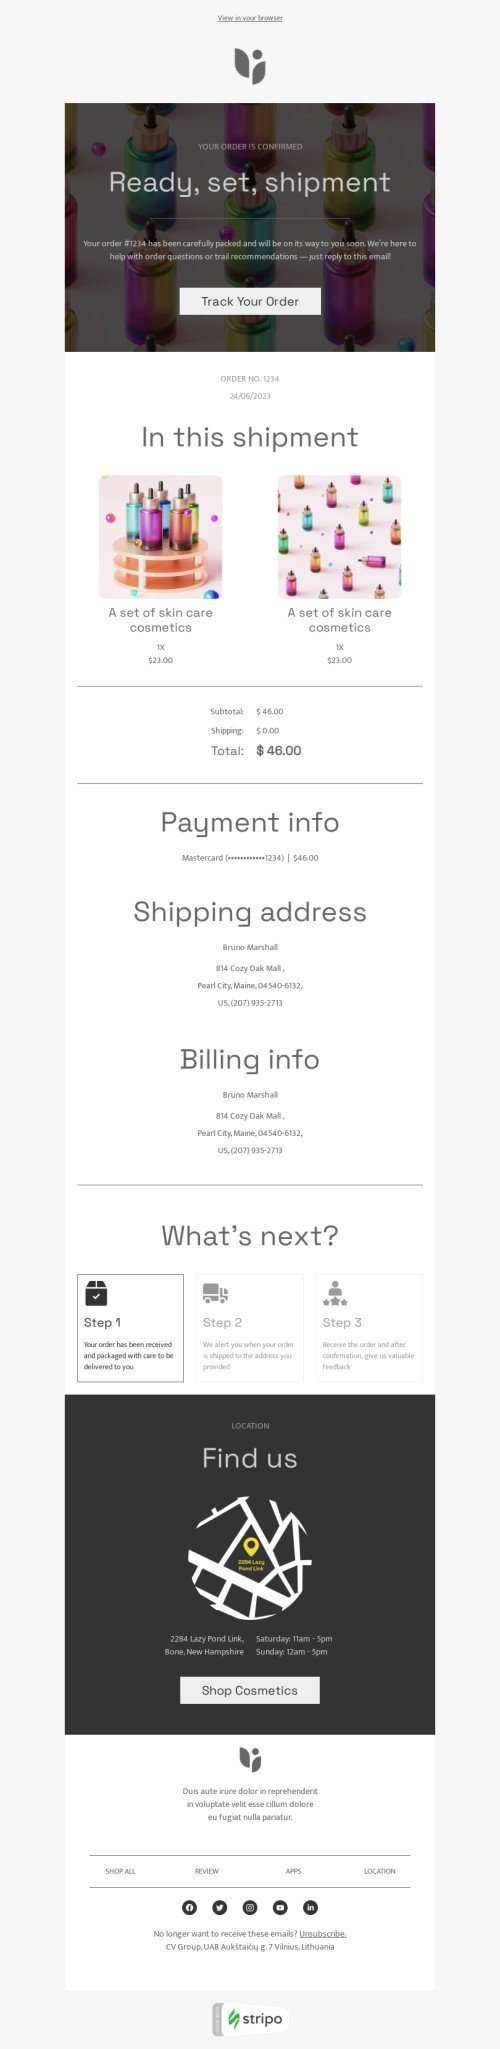 Order confirmation email template "Ready, set, shipped" for beauty & personal care industry mobile view